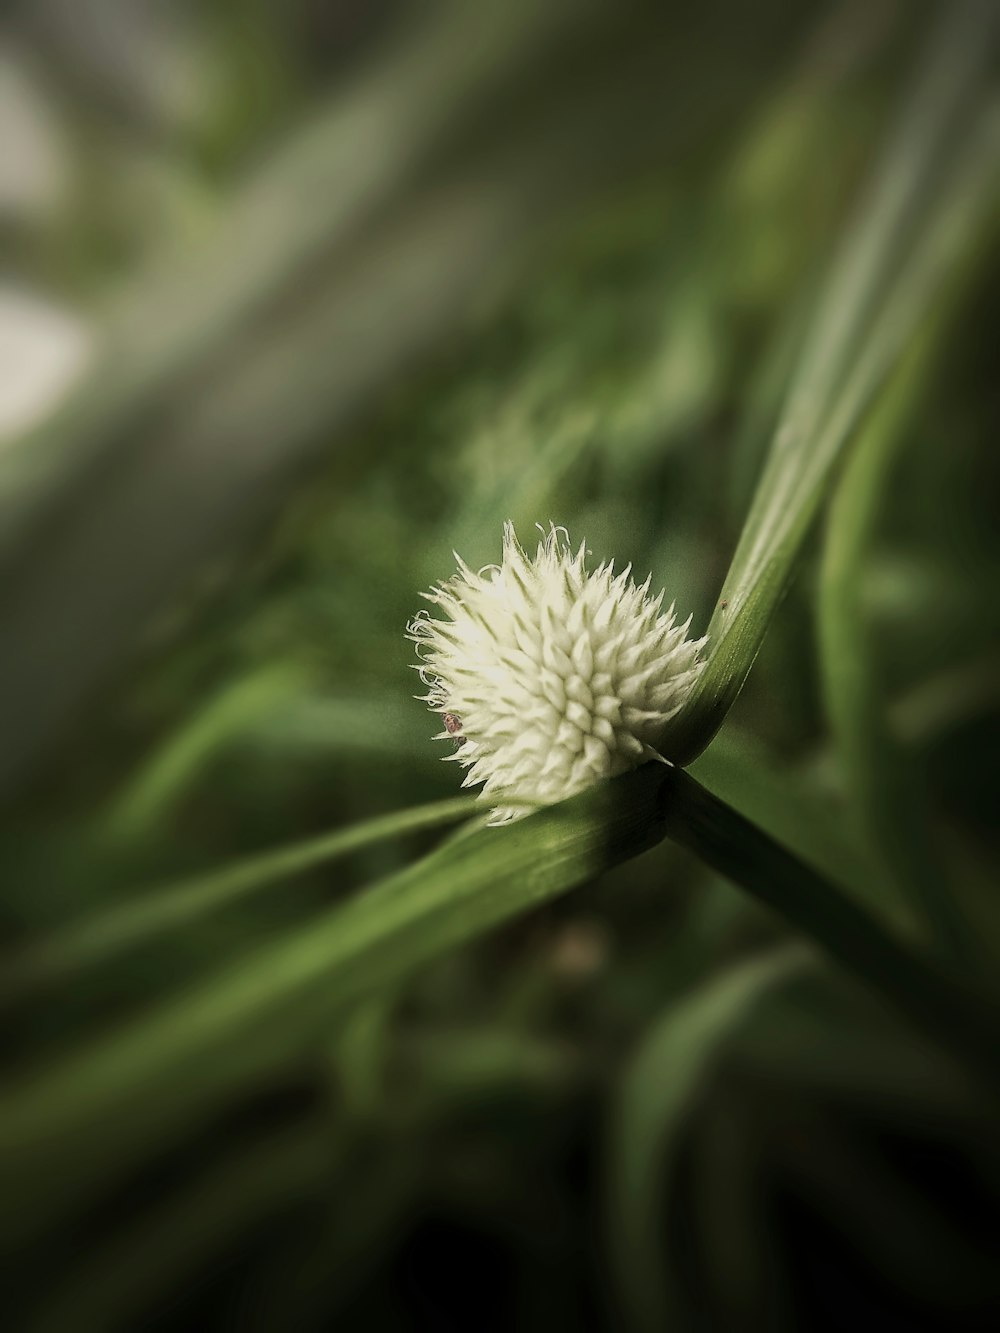 a close up of a white flower on a green plant